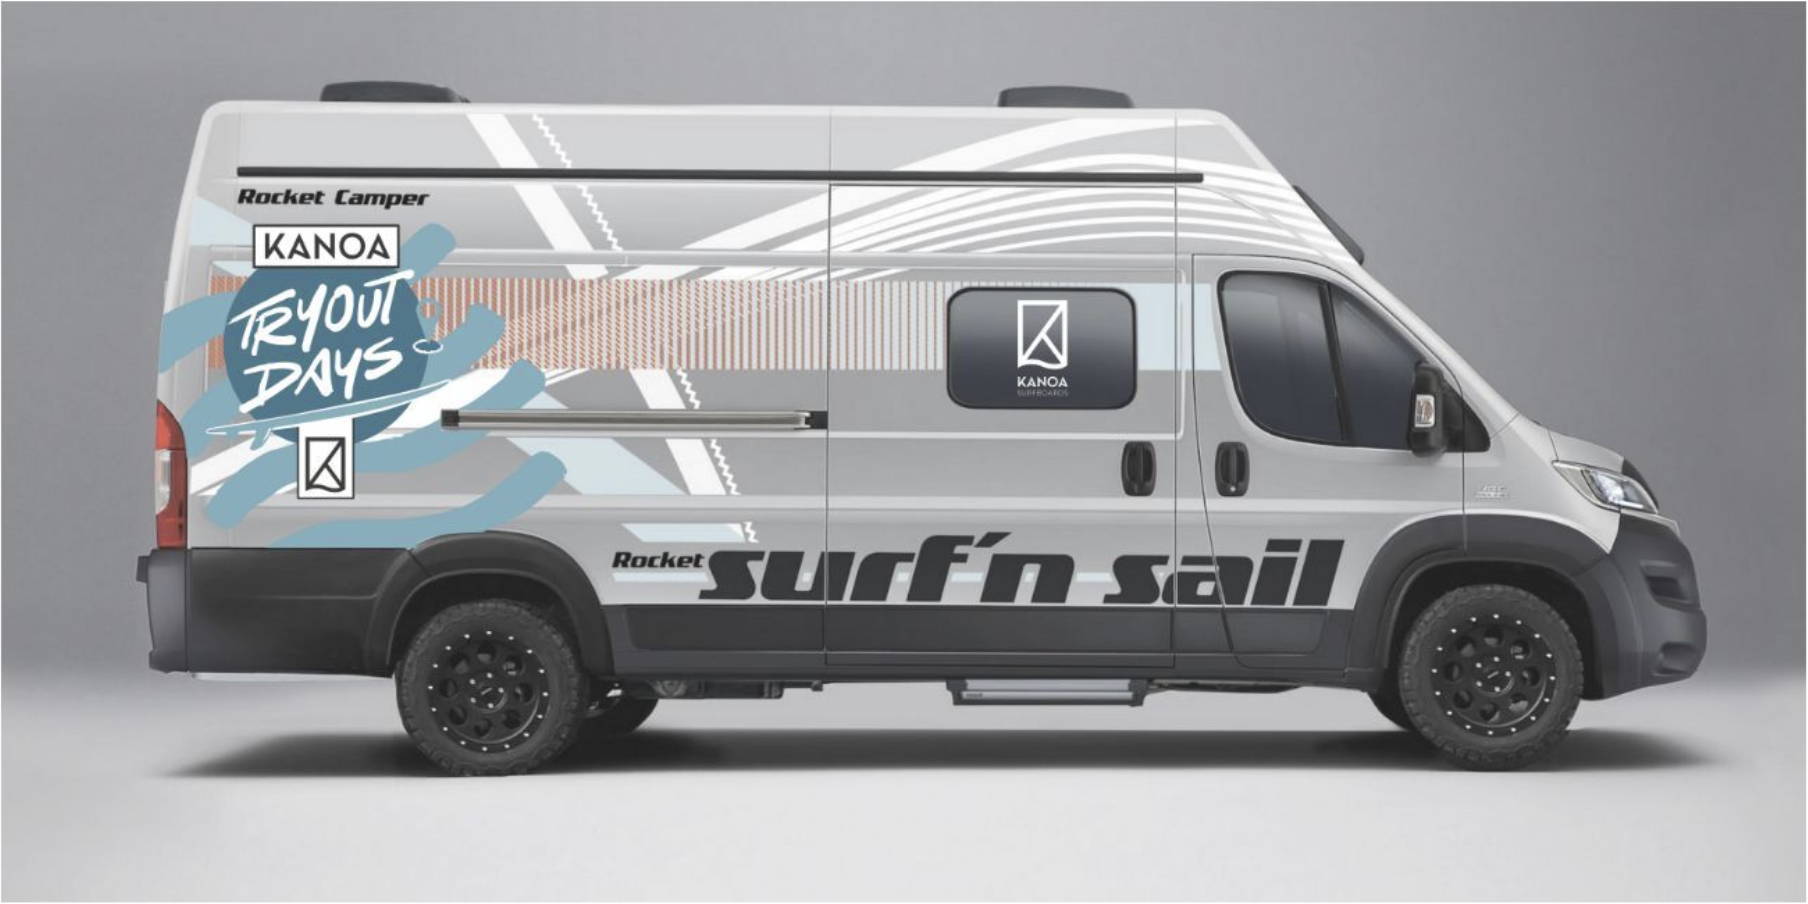 Our KANOA Tryout Days Rocket Camper - rent your van for your next surf adventure